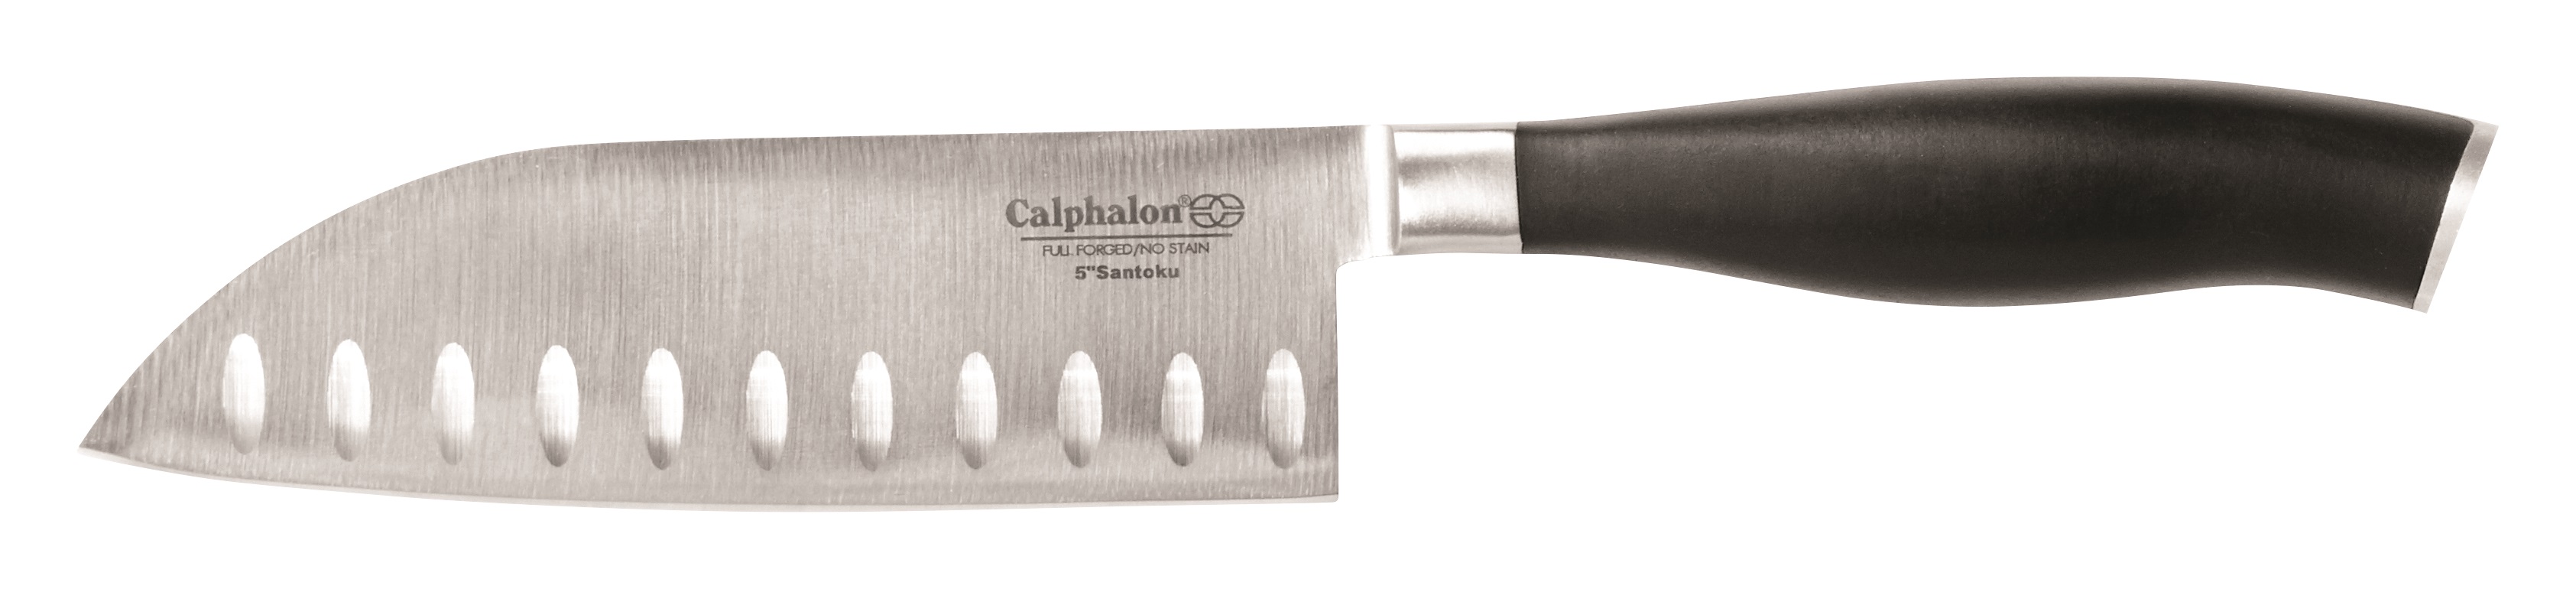 Antimicrobial Cutlery by Calphalon® and Microban®